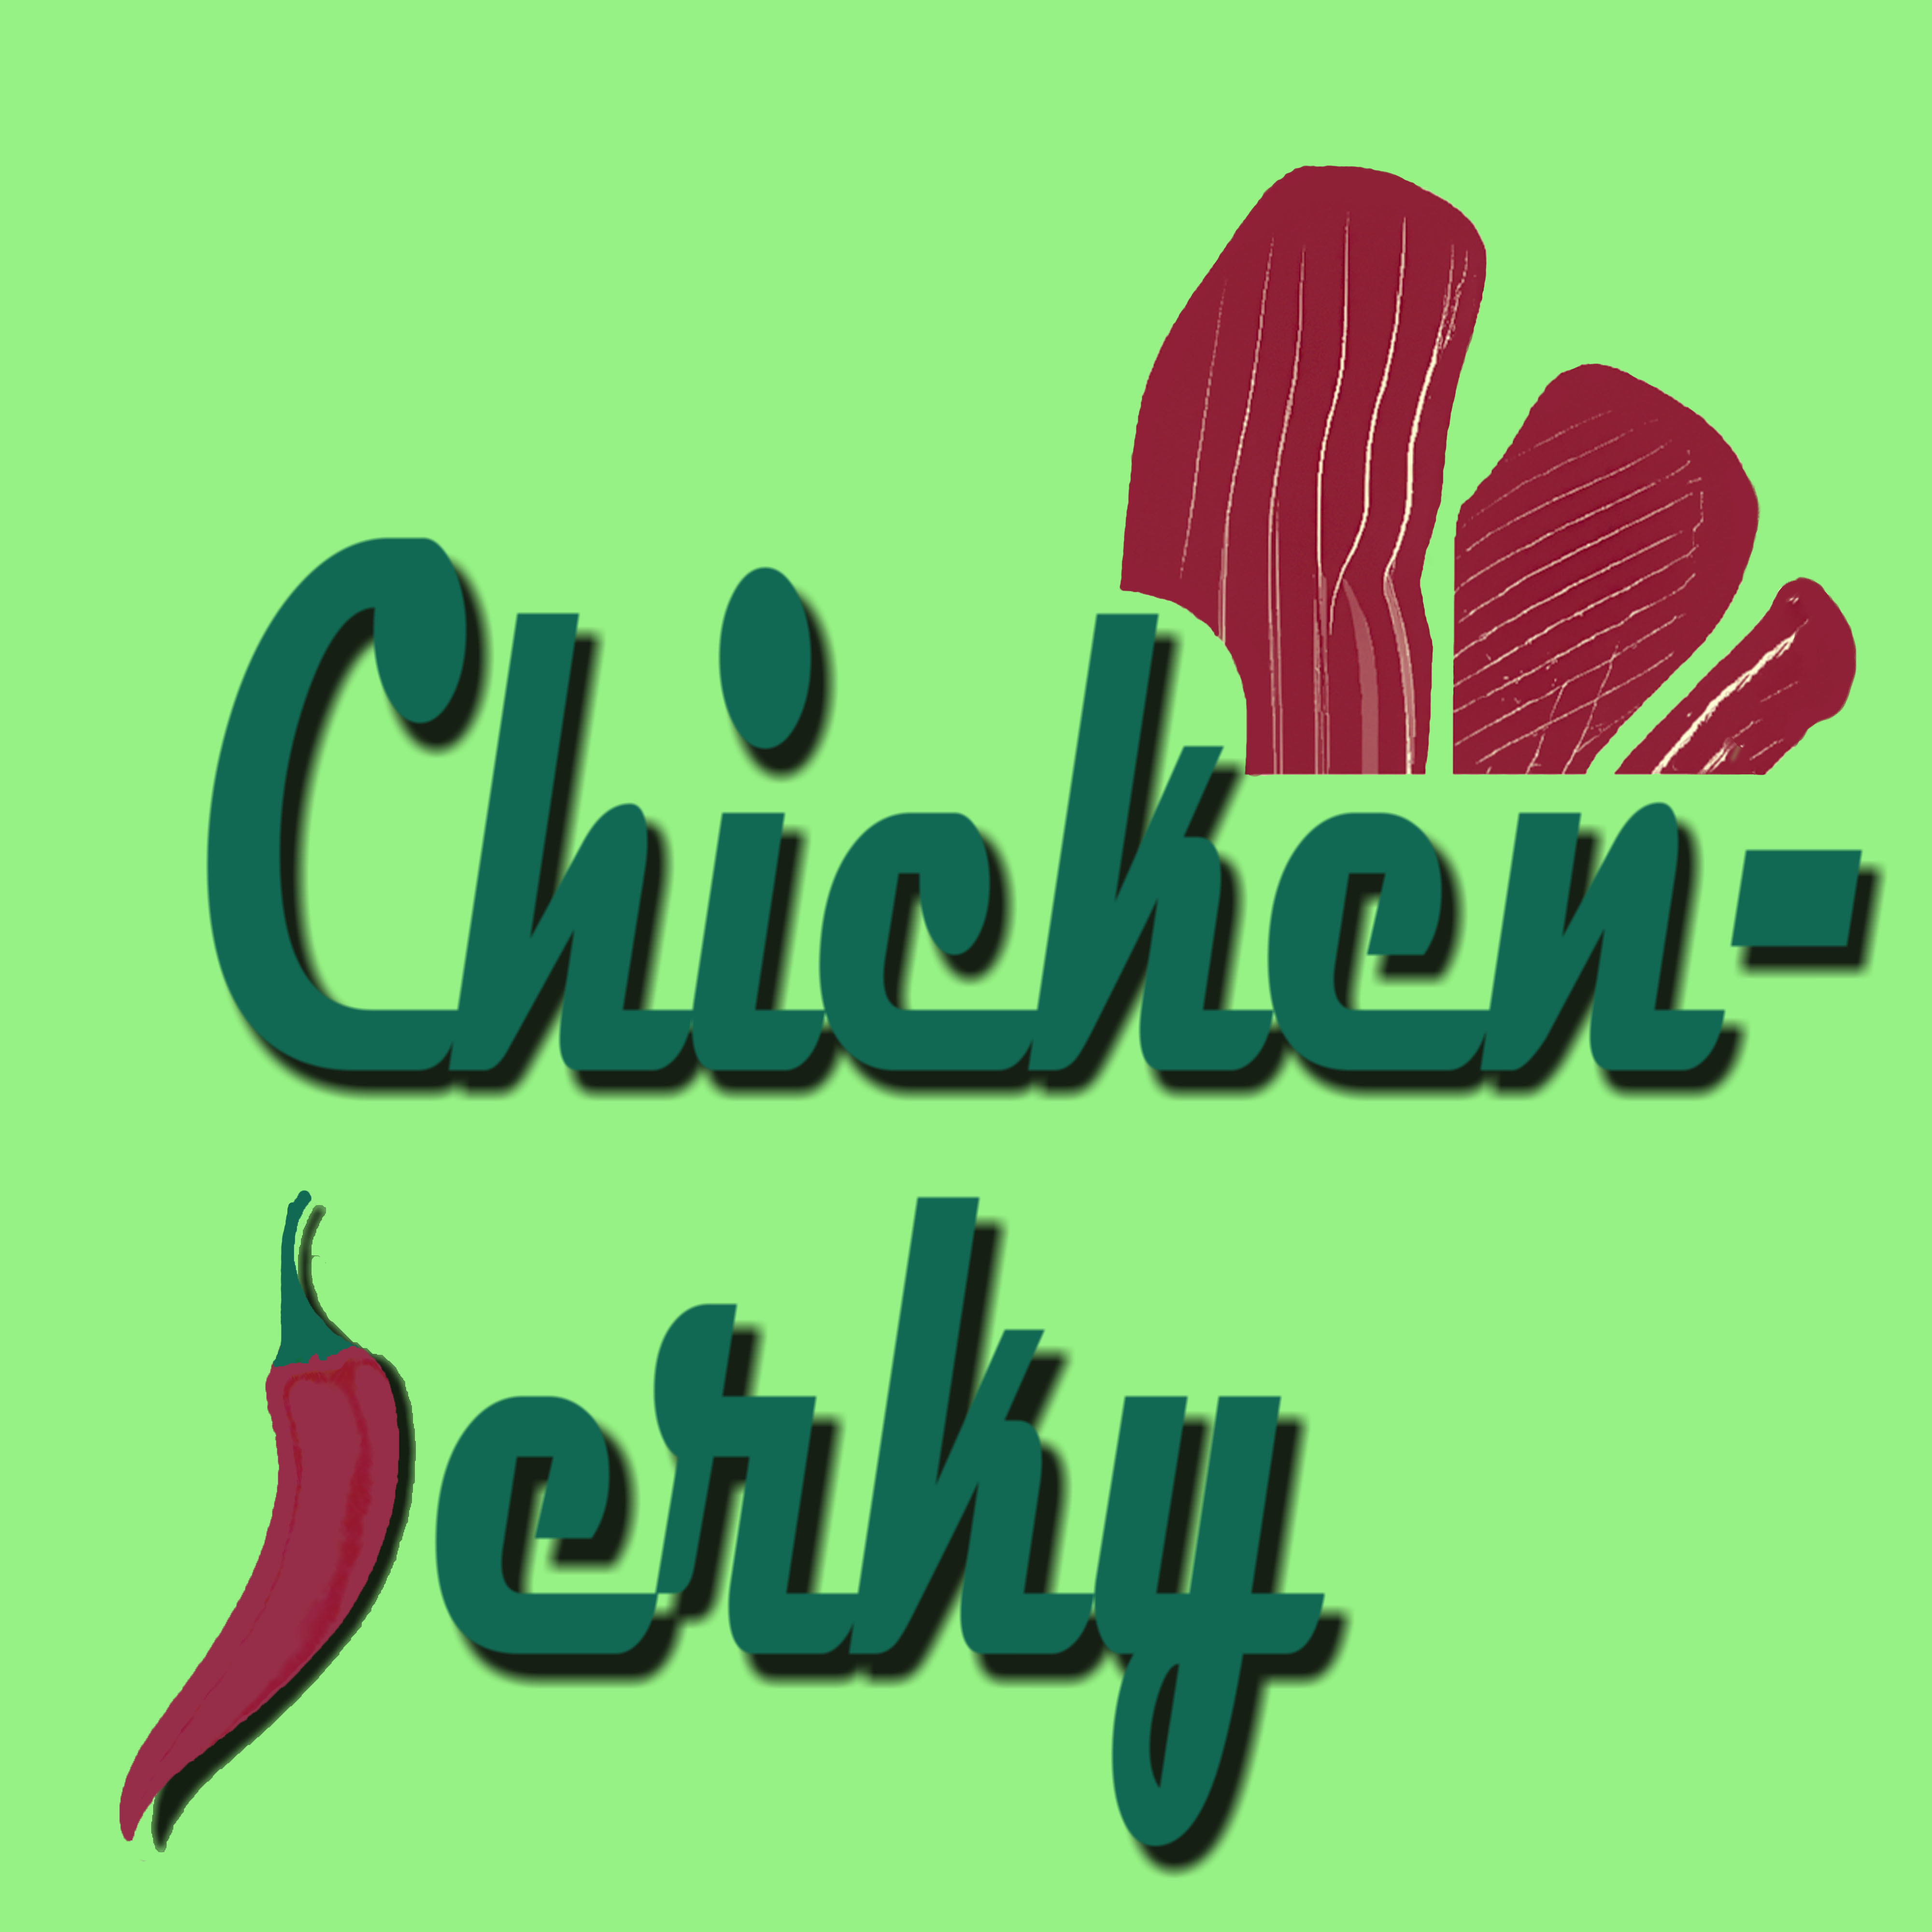 Chicken-jerky logo preview image.